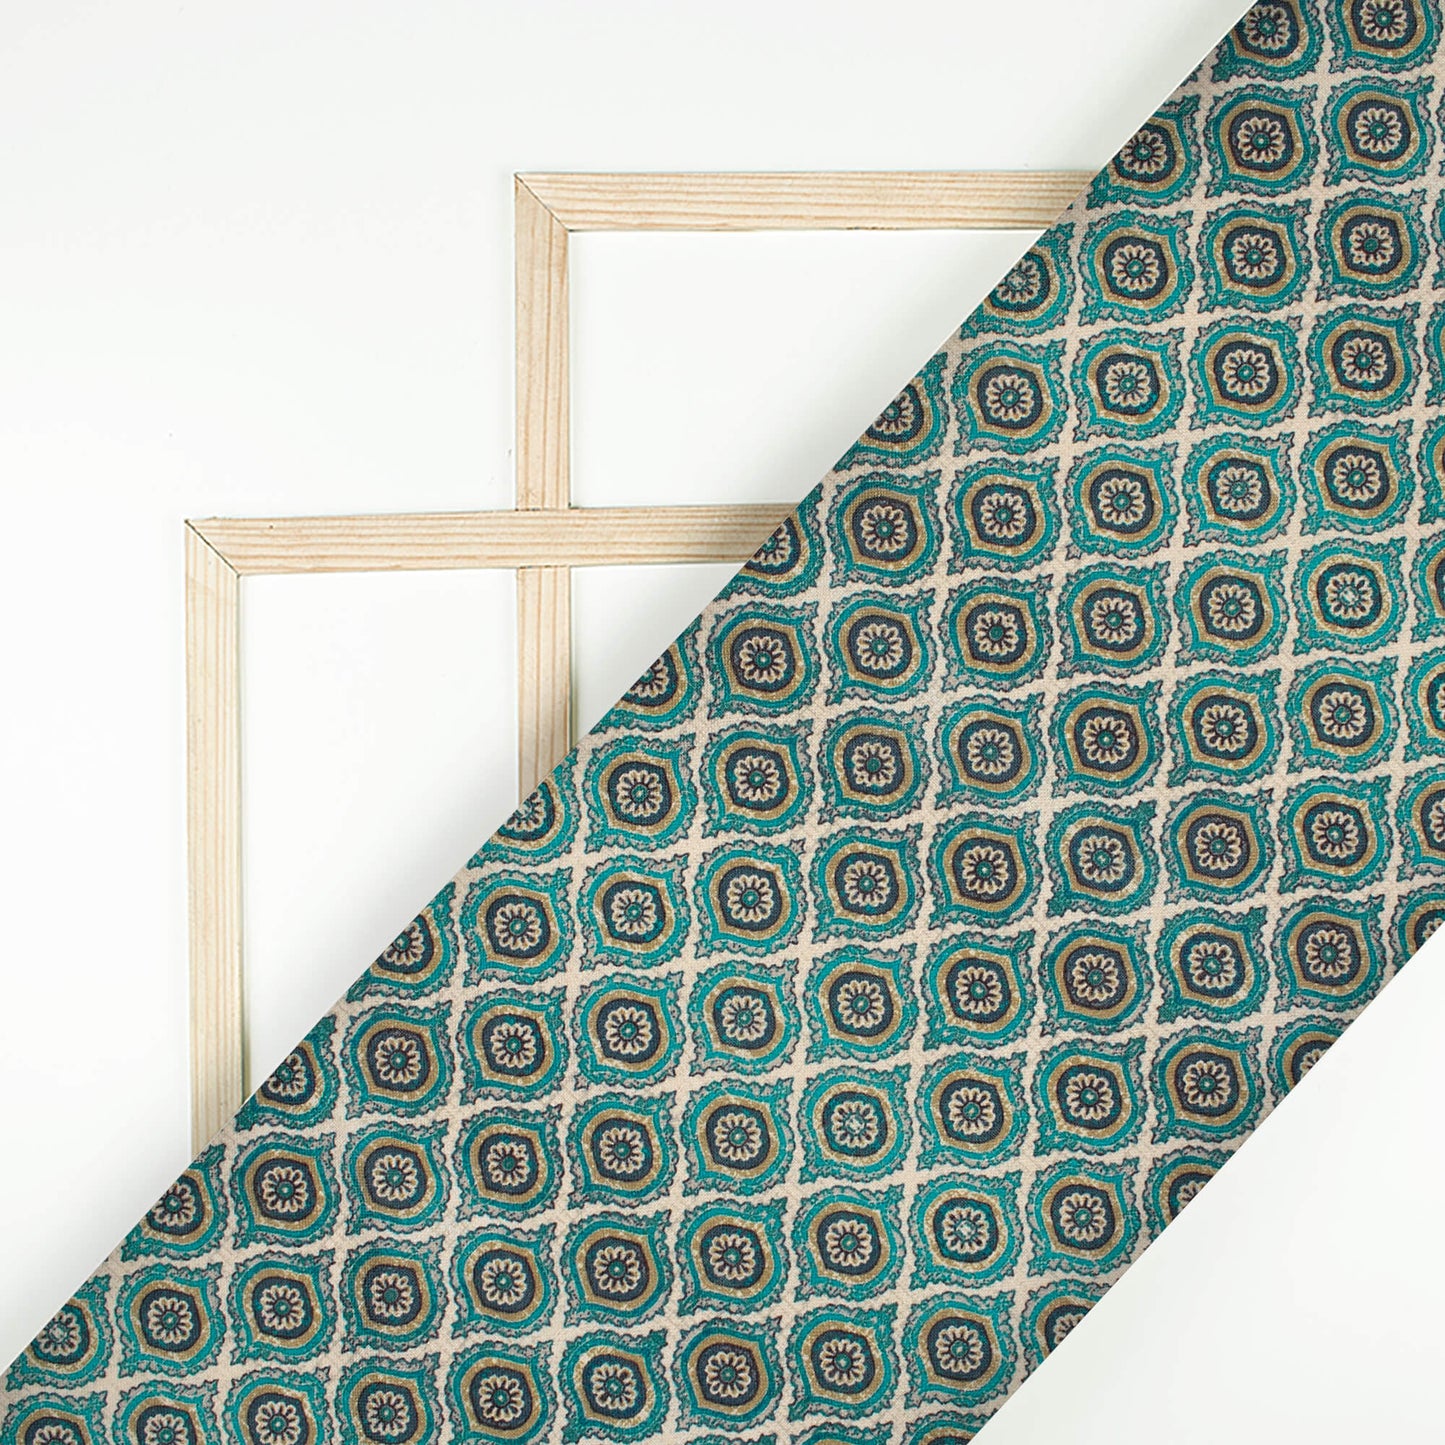 Teal Green And Off White Trellis Pattern Digital Print Linen Textured Fabric (Width 56 Inches)